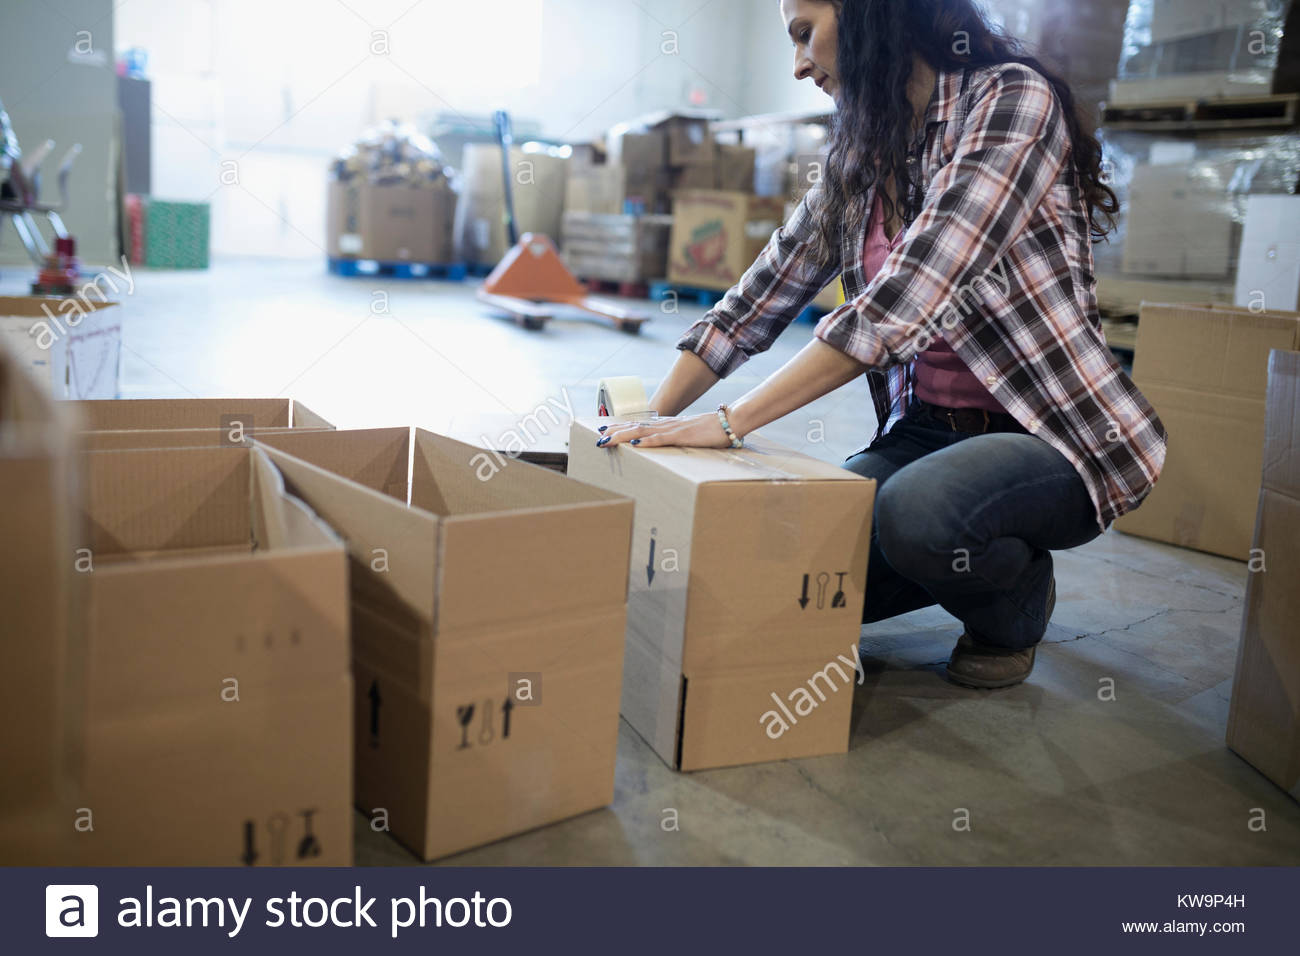 Female volunteer taping donation boxes in warehouse Stock Photo